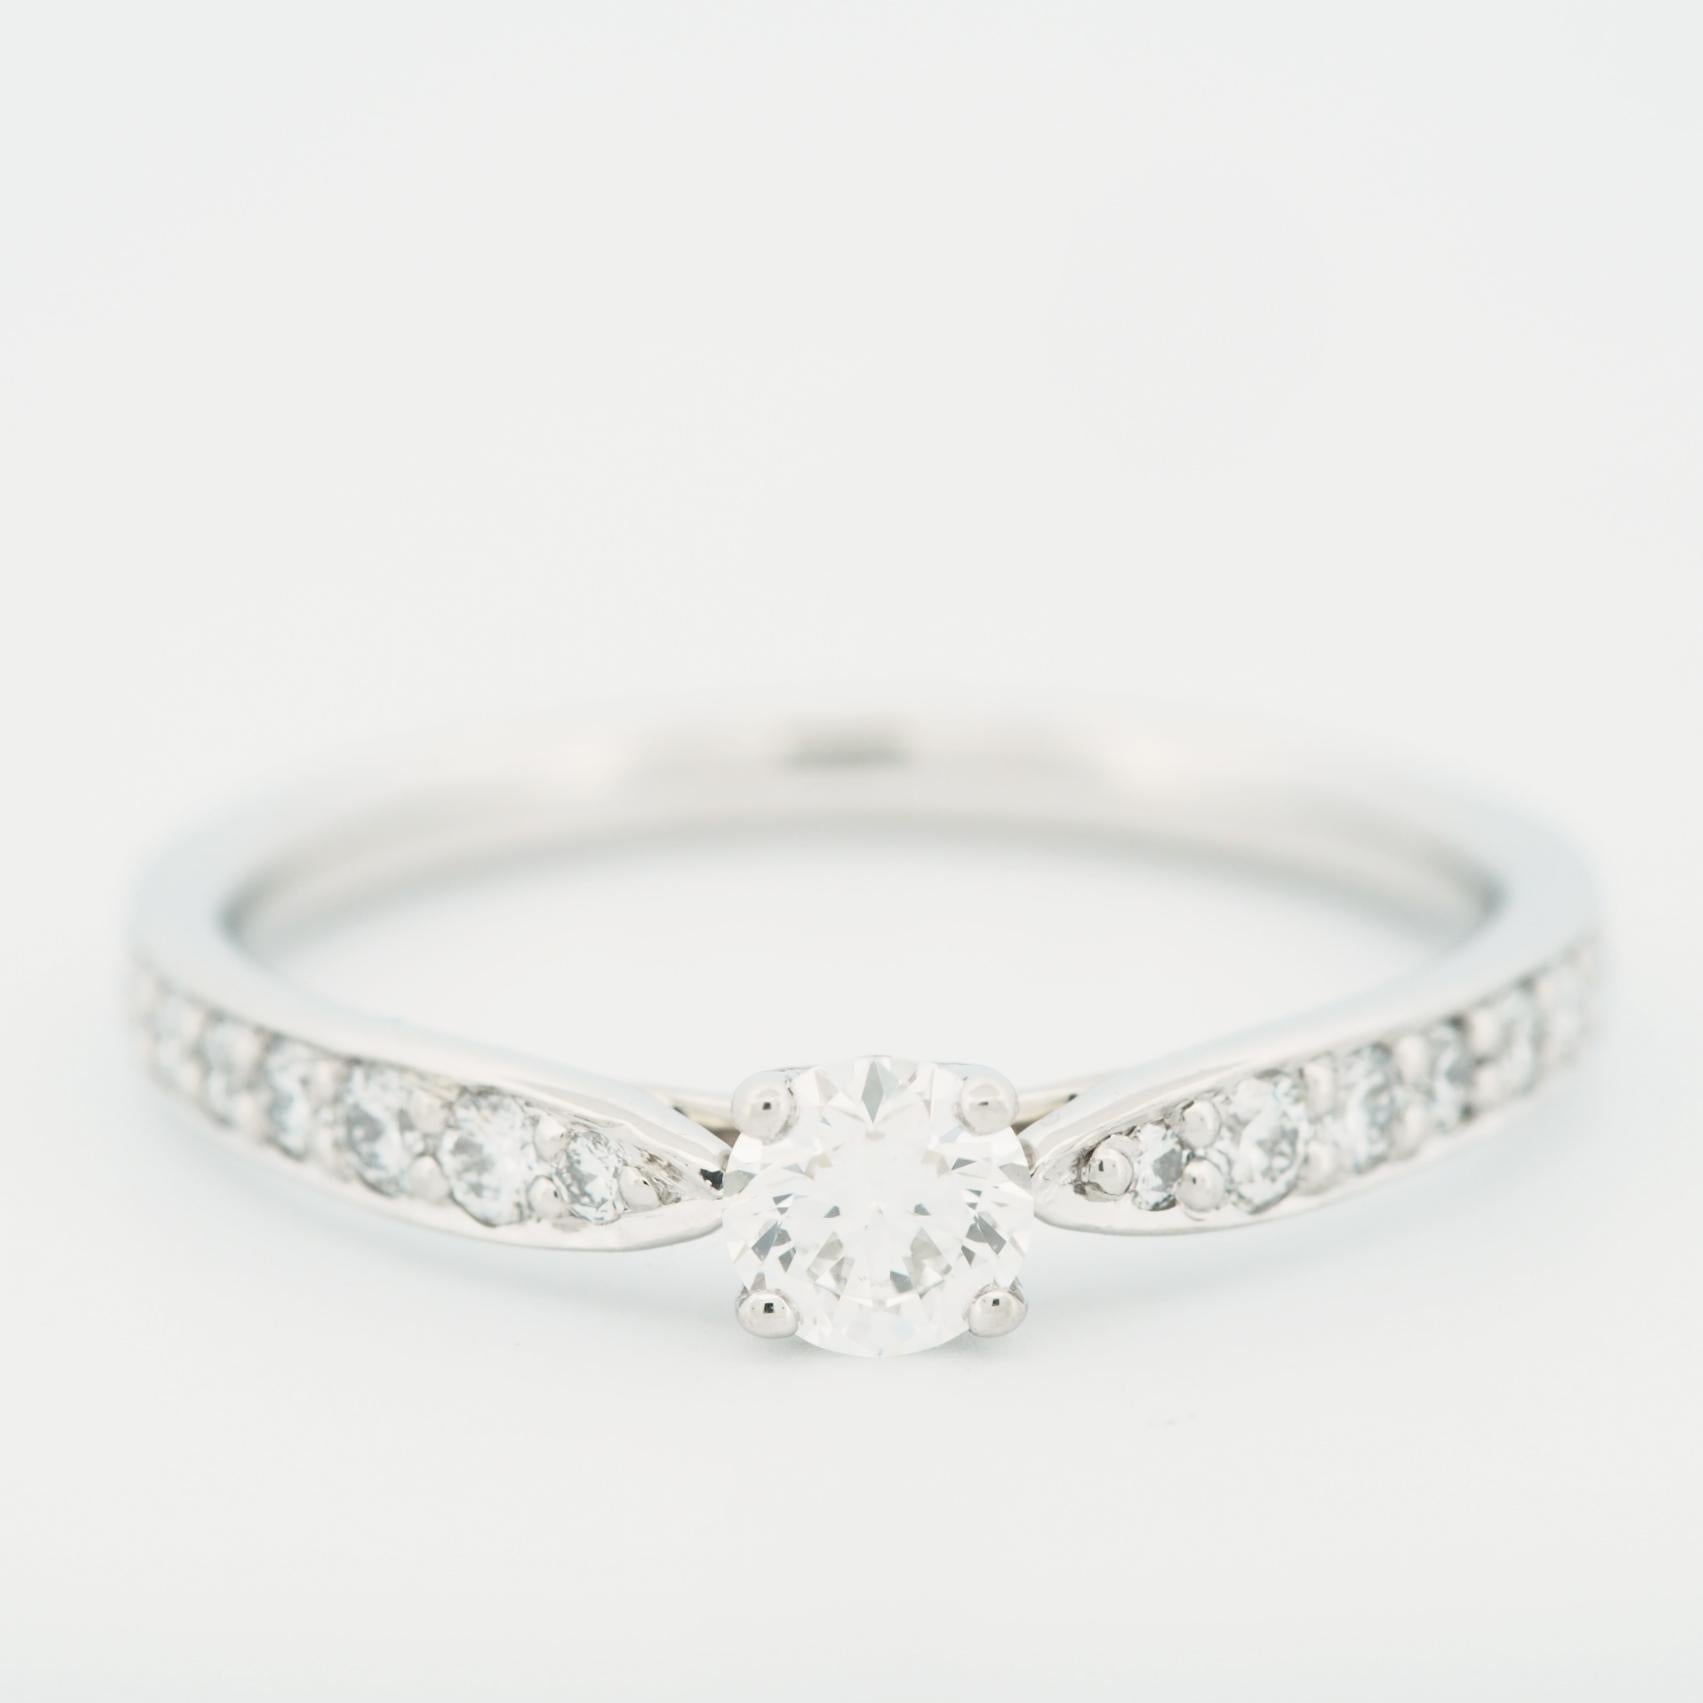 Tiffany Harmony 0.20 Carat Solitaire Diamond Ring PT950 with 18 Pave Diamonds In Good Condition For Sale In Kobe, Hyogo